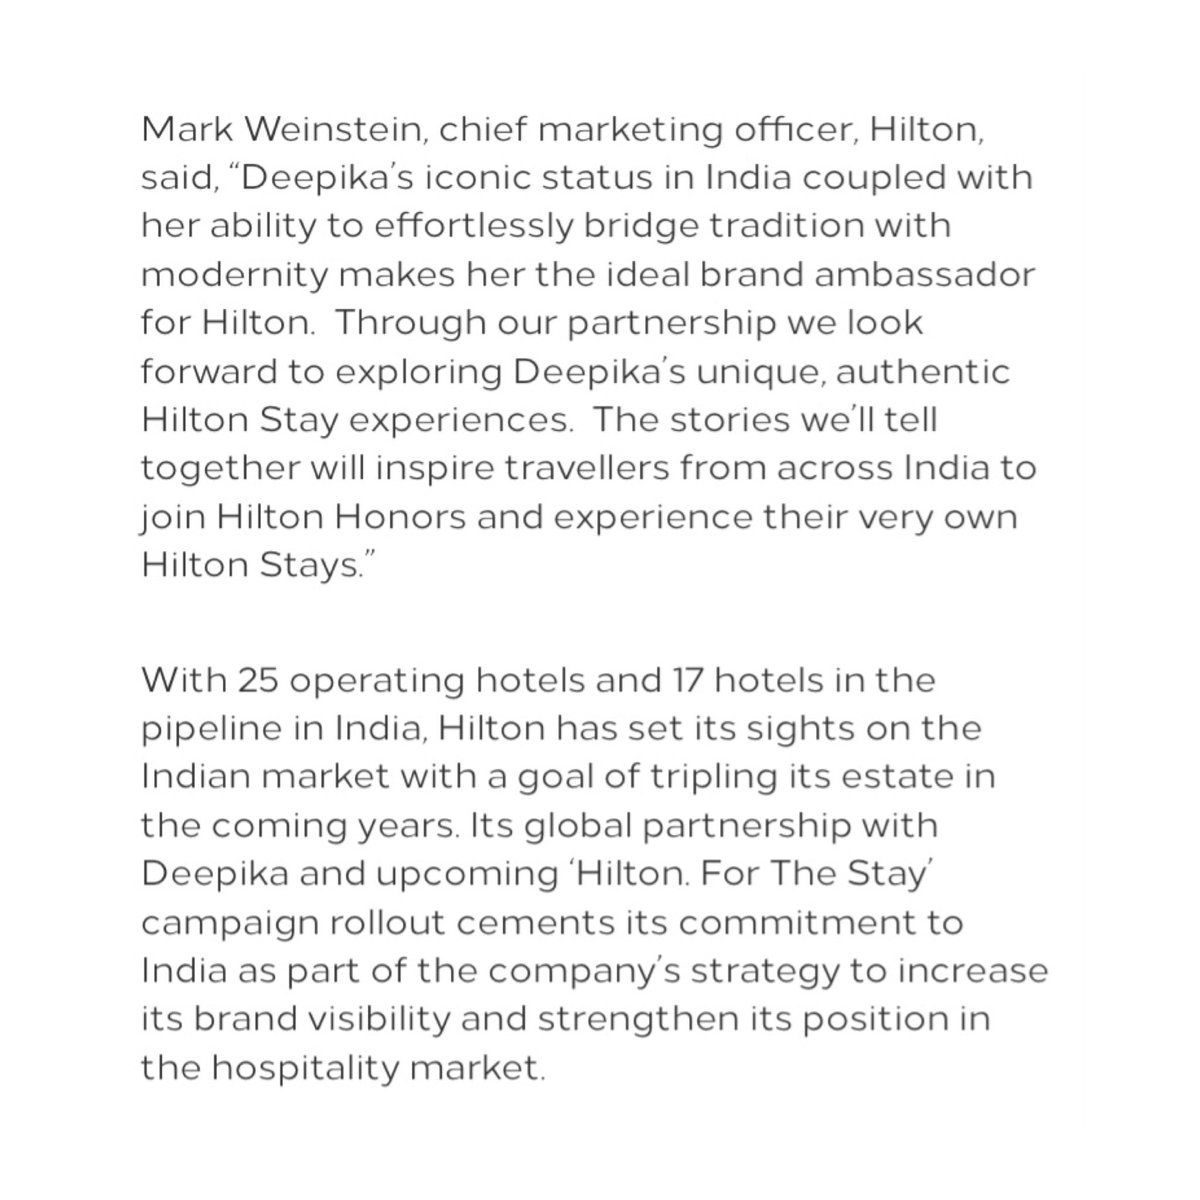 “Deepika’s iconic status in India coupled with her ability to effortlessly bridge tradition with modernity makes her the ideal brand ambassador for Hilton...” - Mark Weinstein, chief marketing officer, Hilton

#DeepikaPadukone #HiltonForTheStay